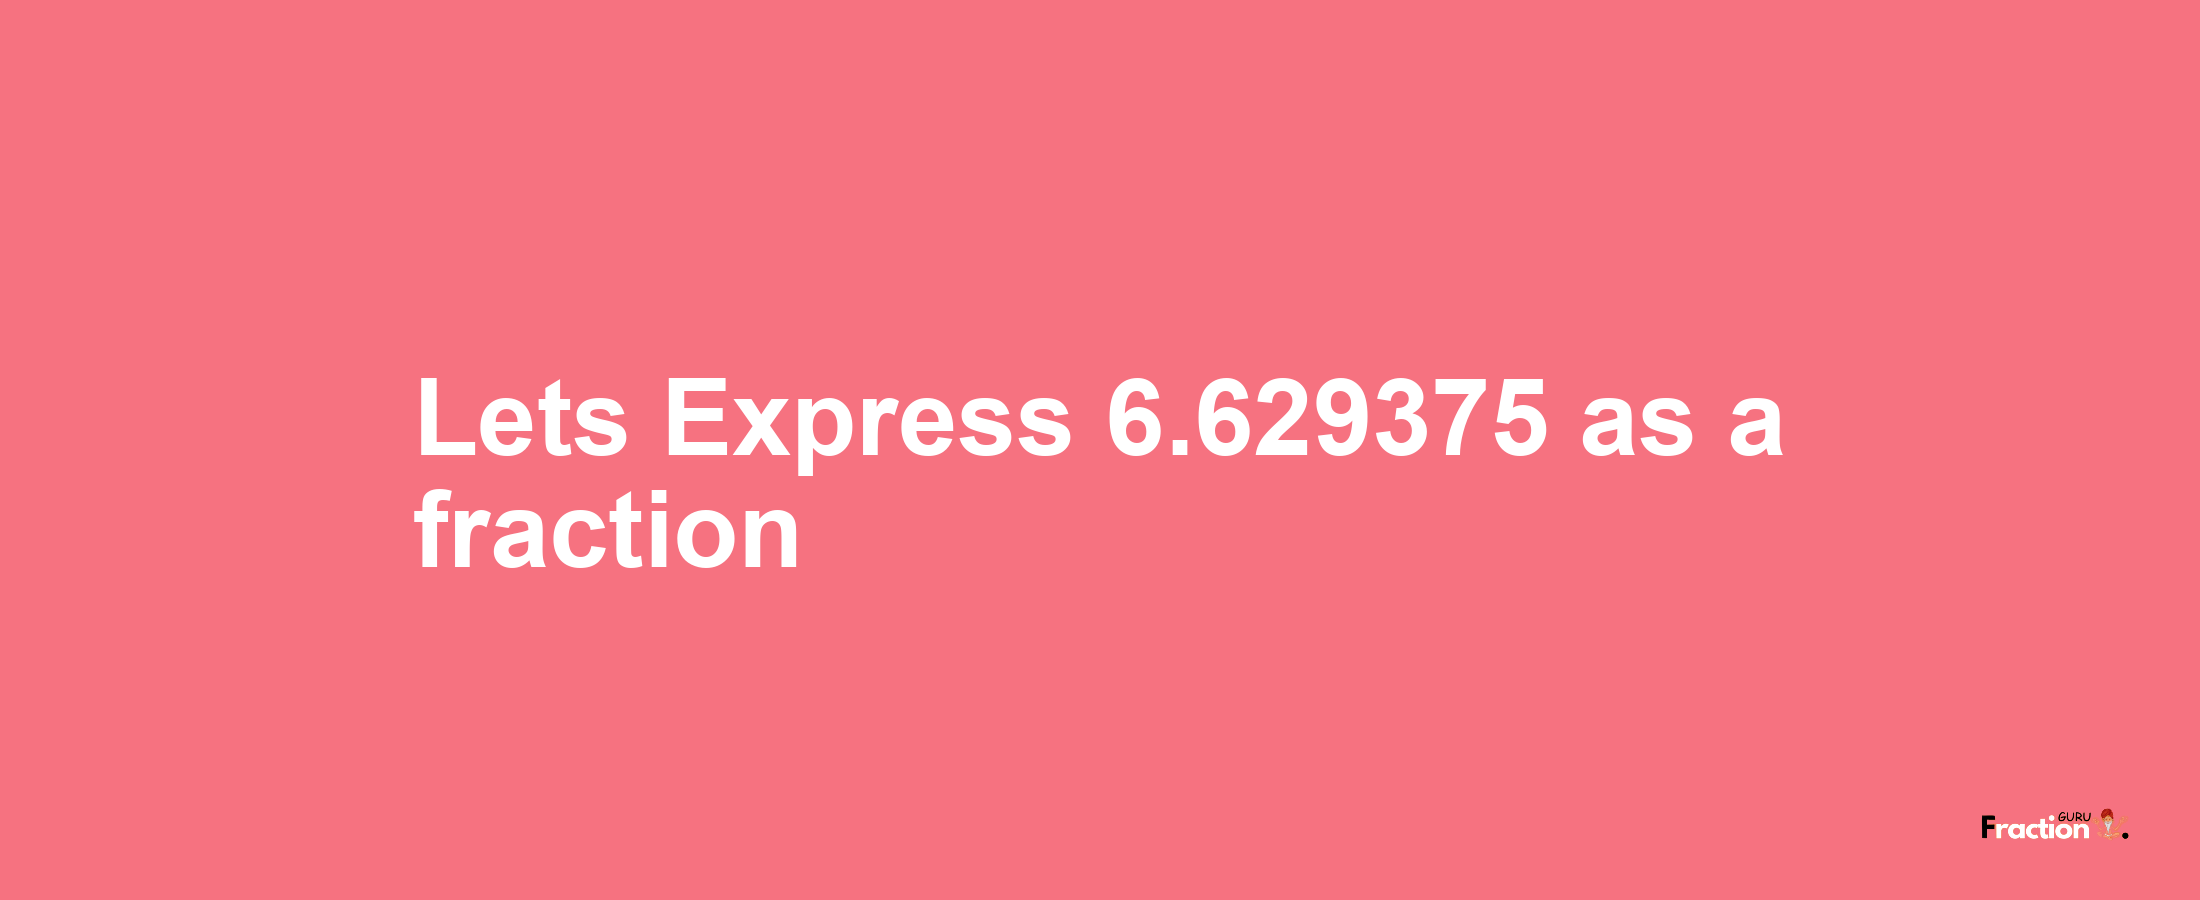 Lets Express 6.629375 as afraction